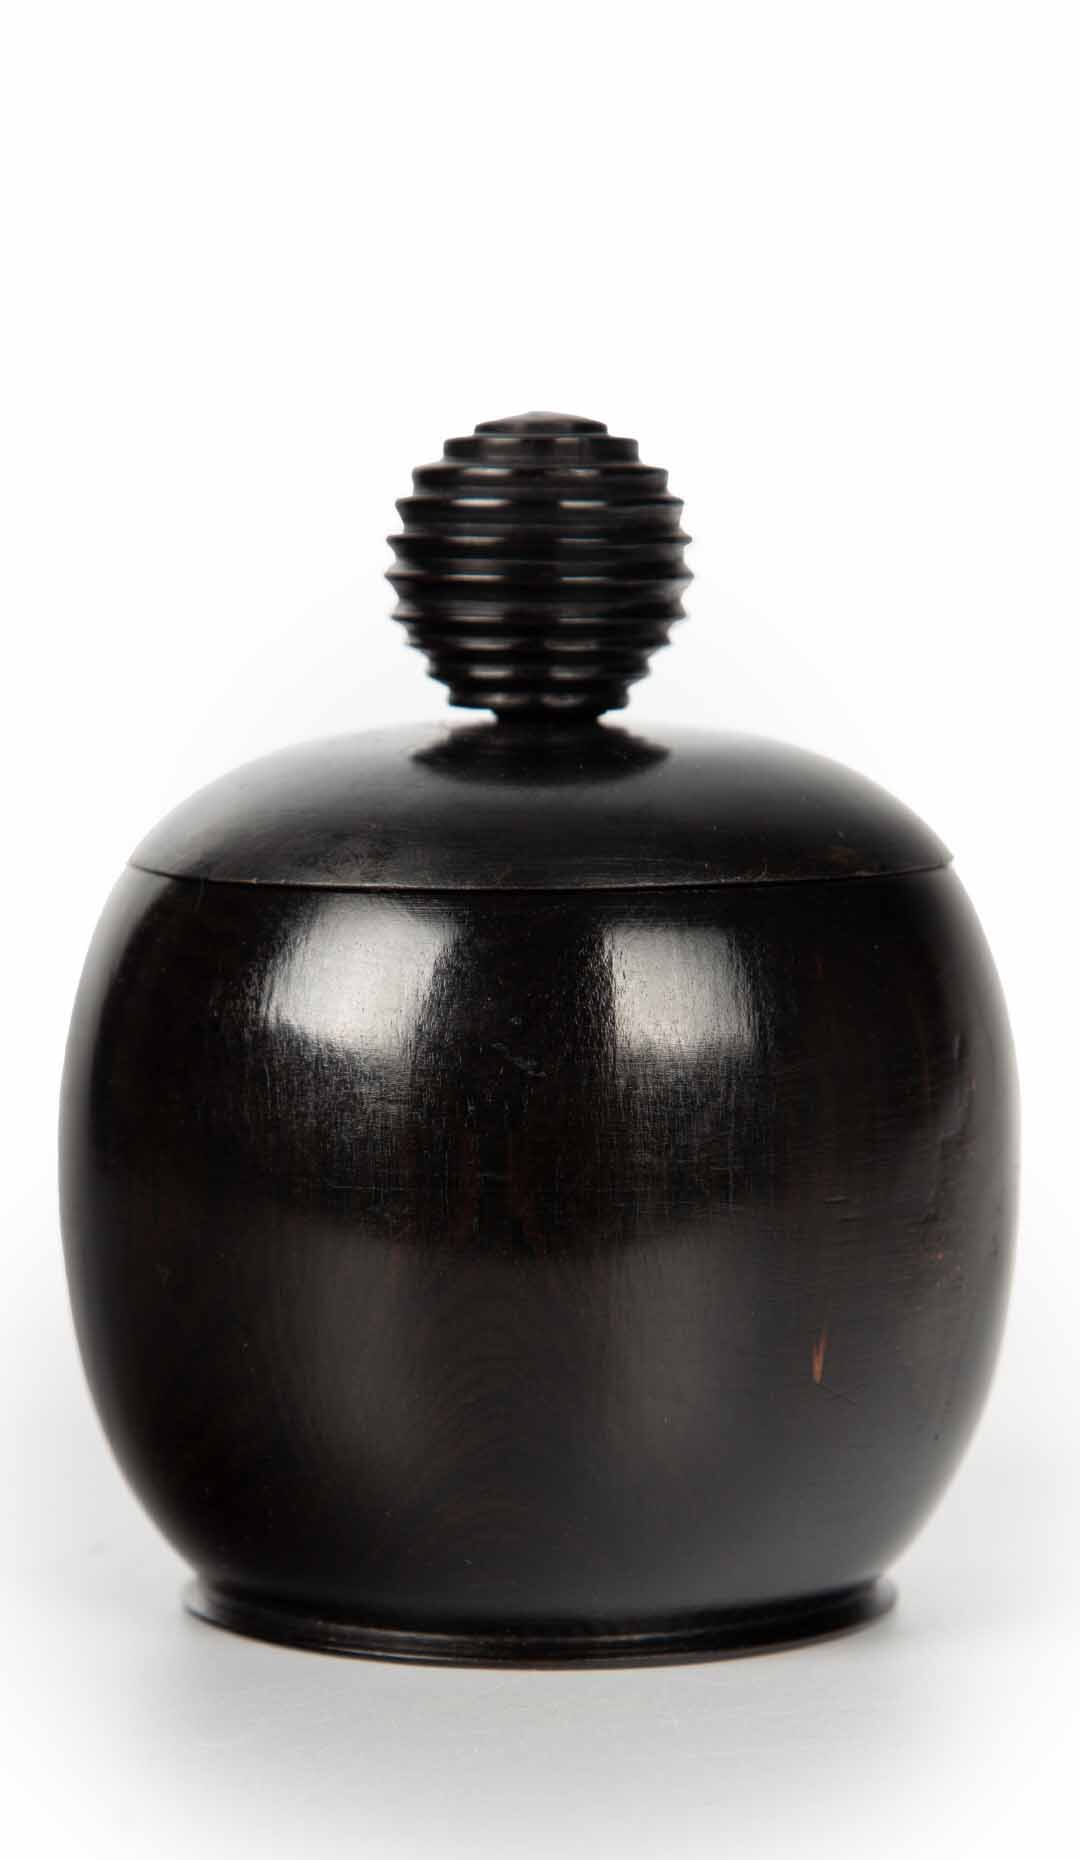 Turned ebony vessel from Mozambique.